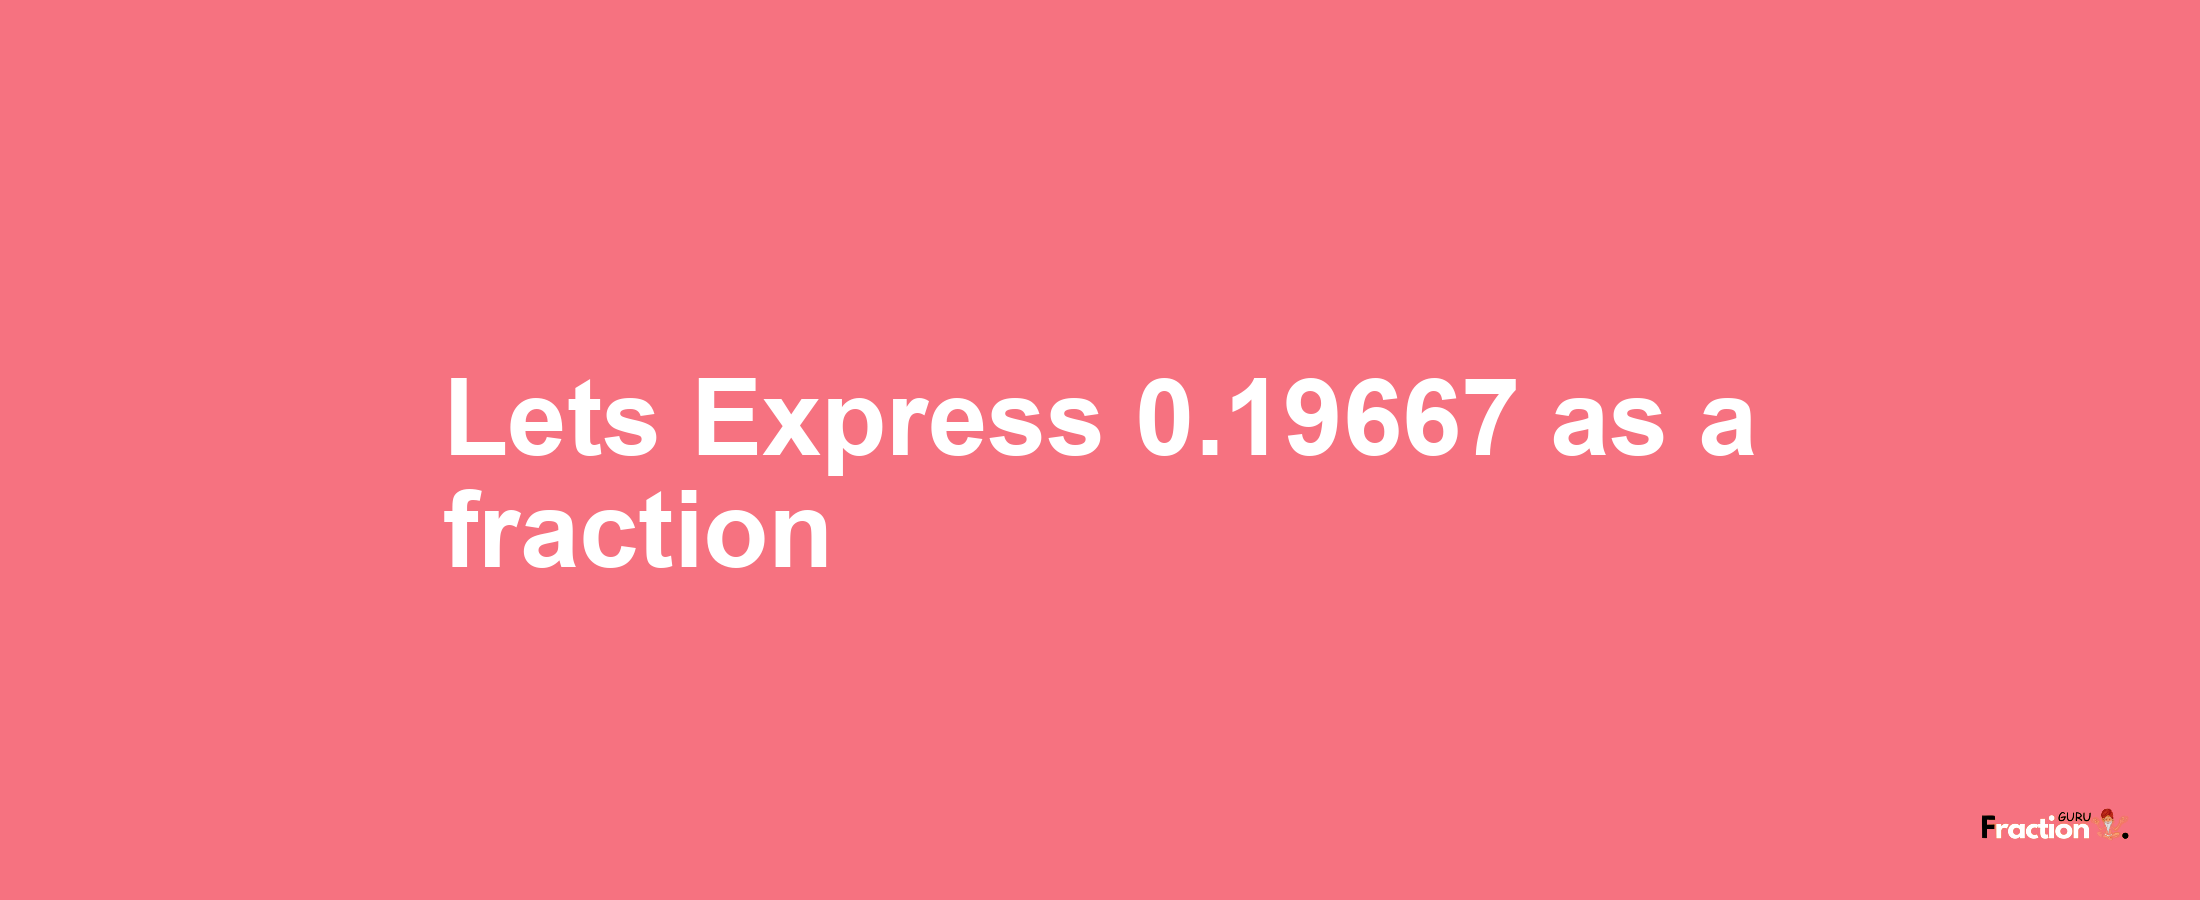 Lets Express 0.19667 as afraction